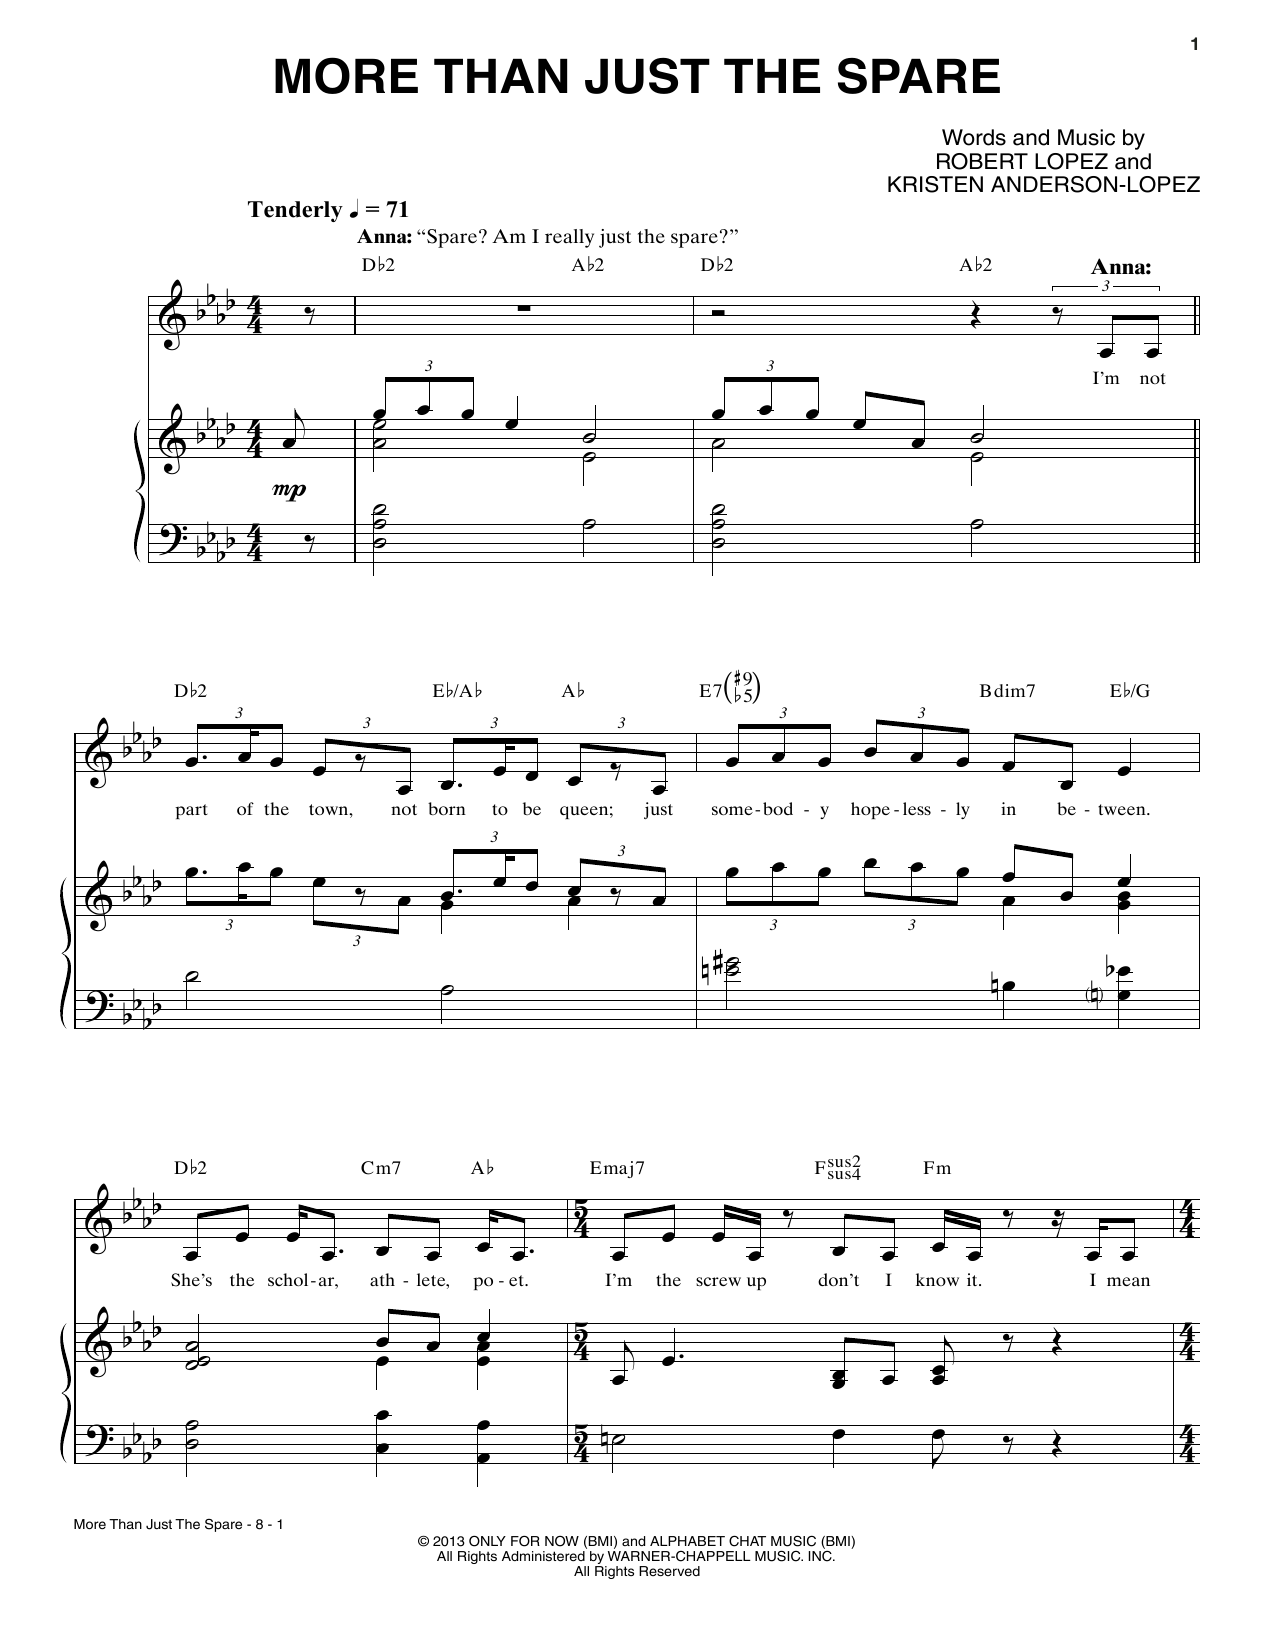 Download Kristen Anderson-Lopez More Than Just The Spare Sheet Music